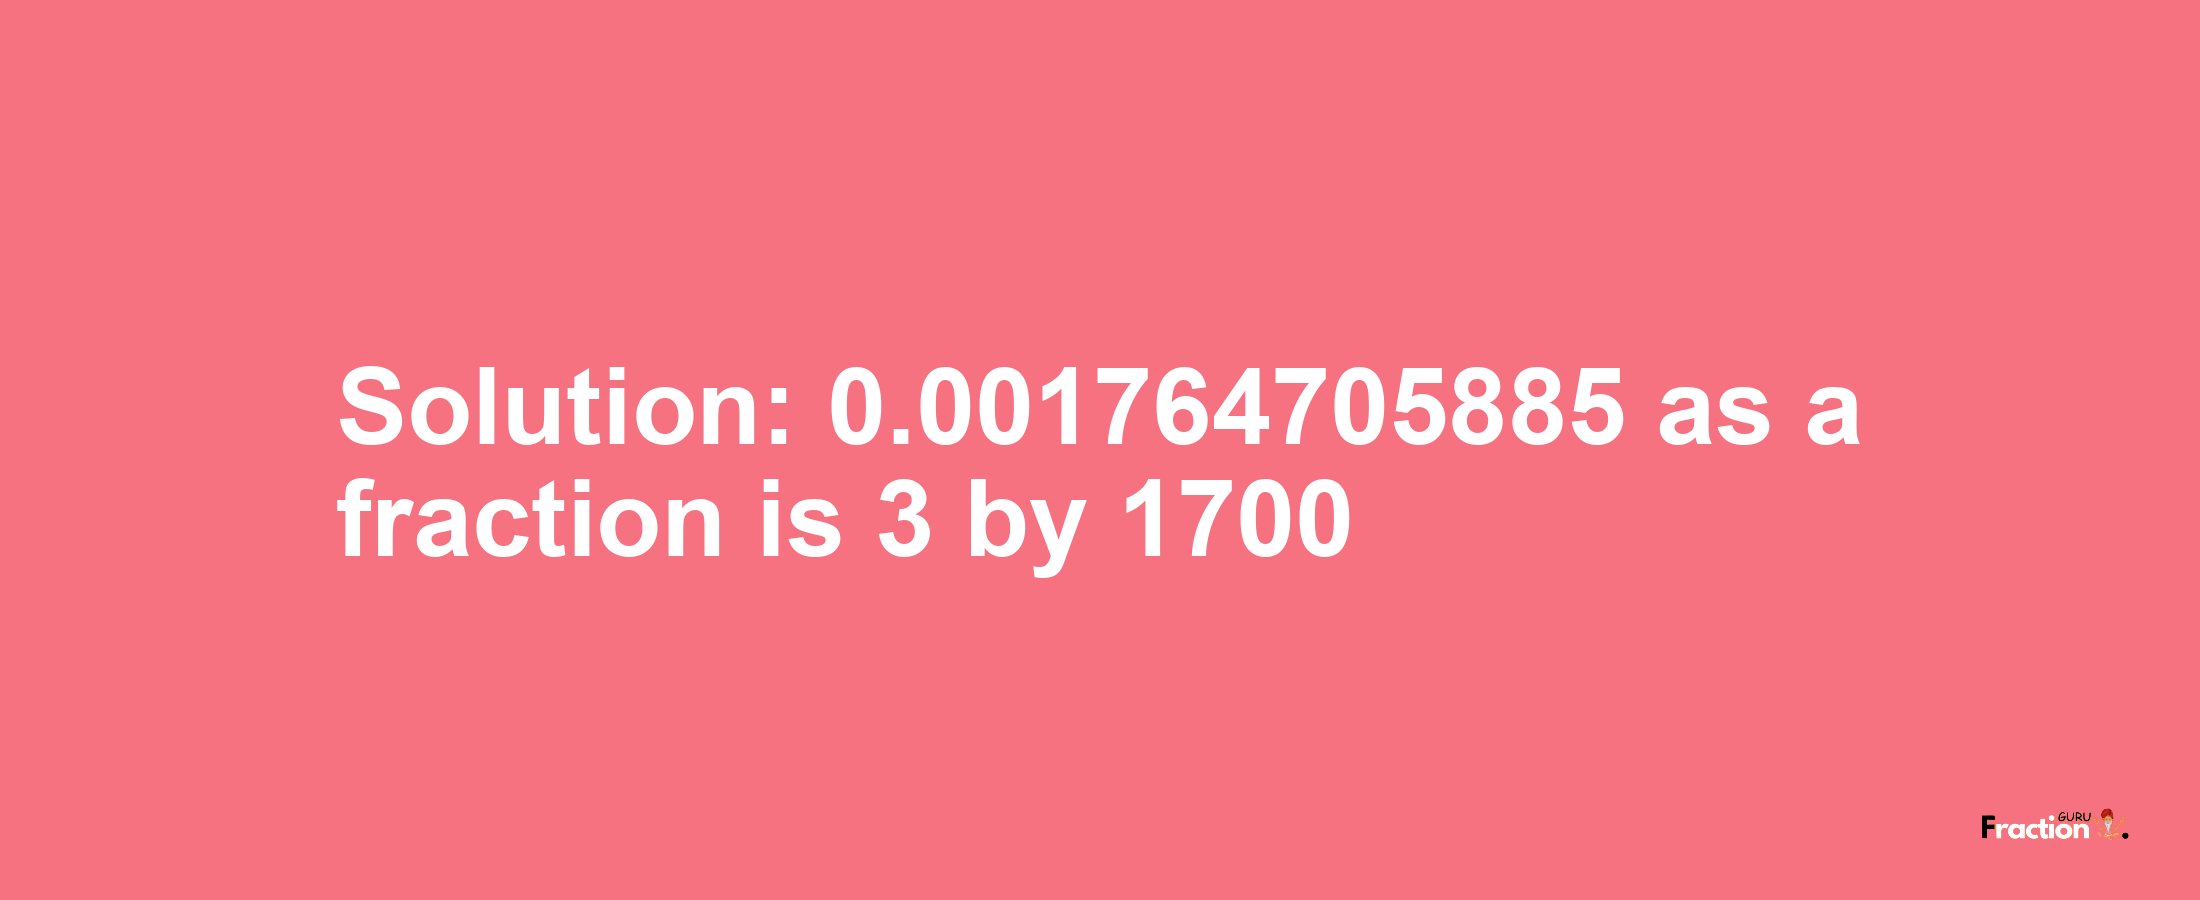 Solution:0.001764705885 as a fraction is 3/1700